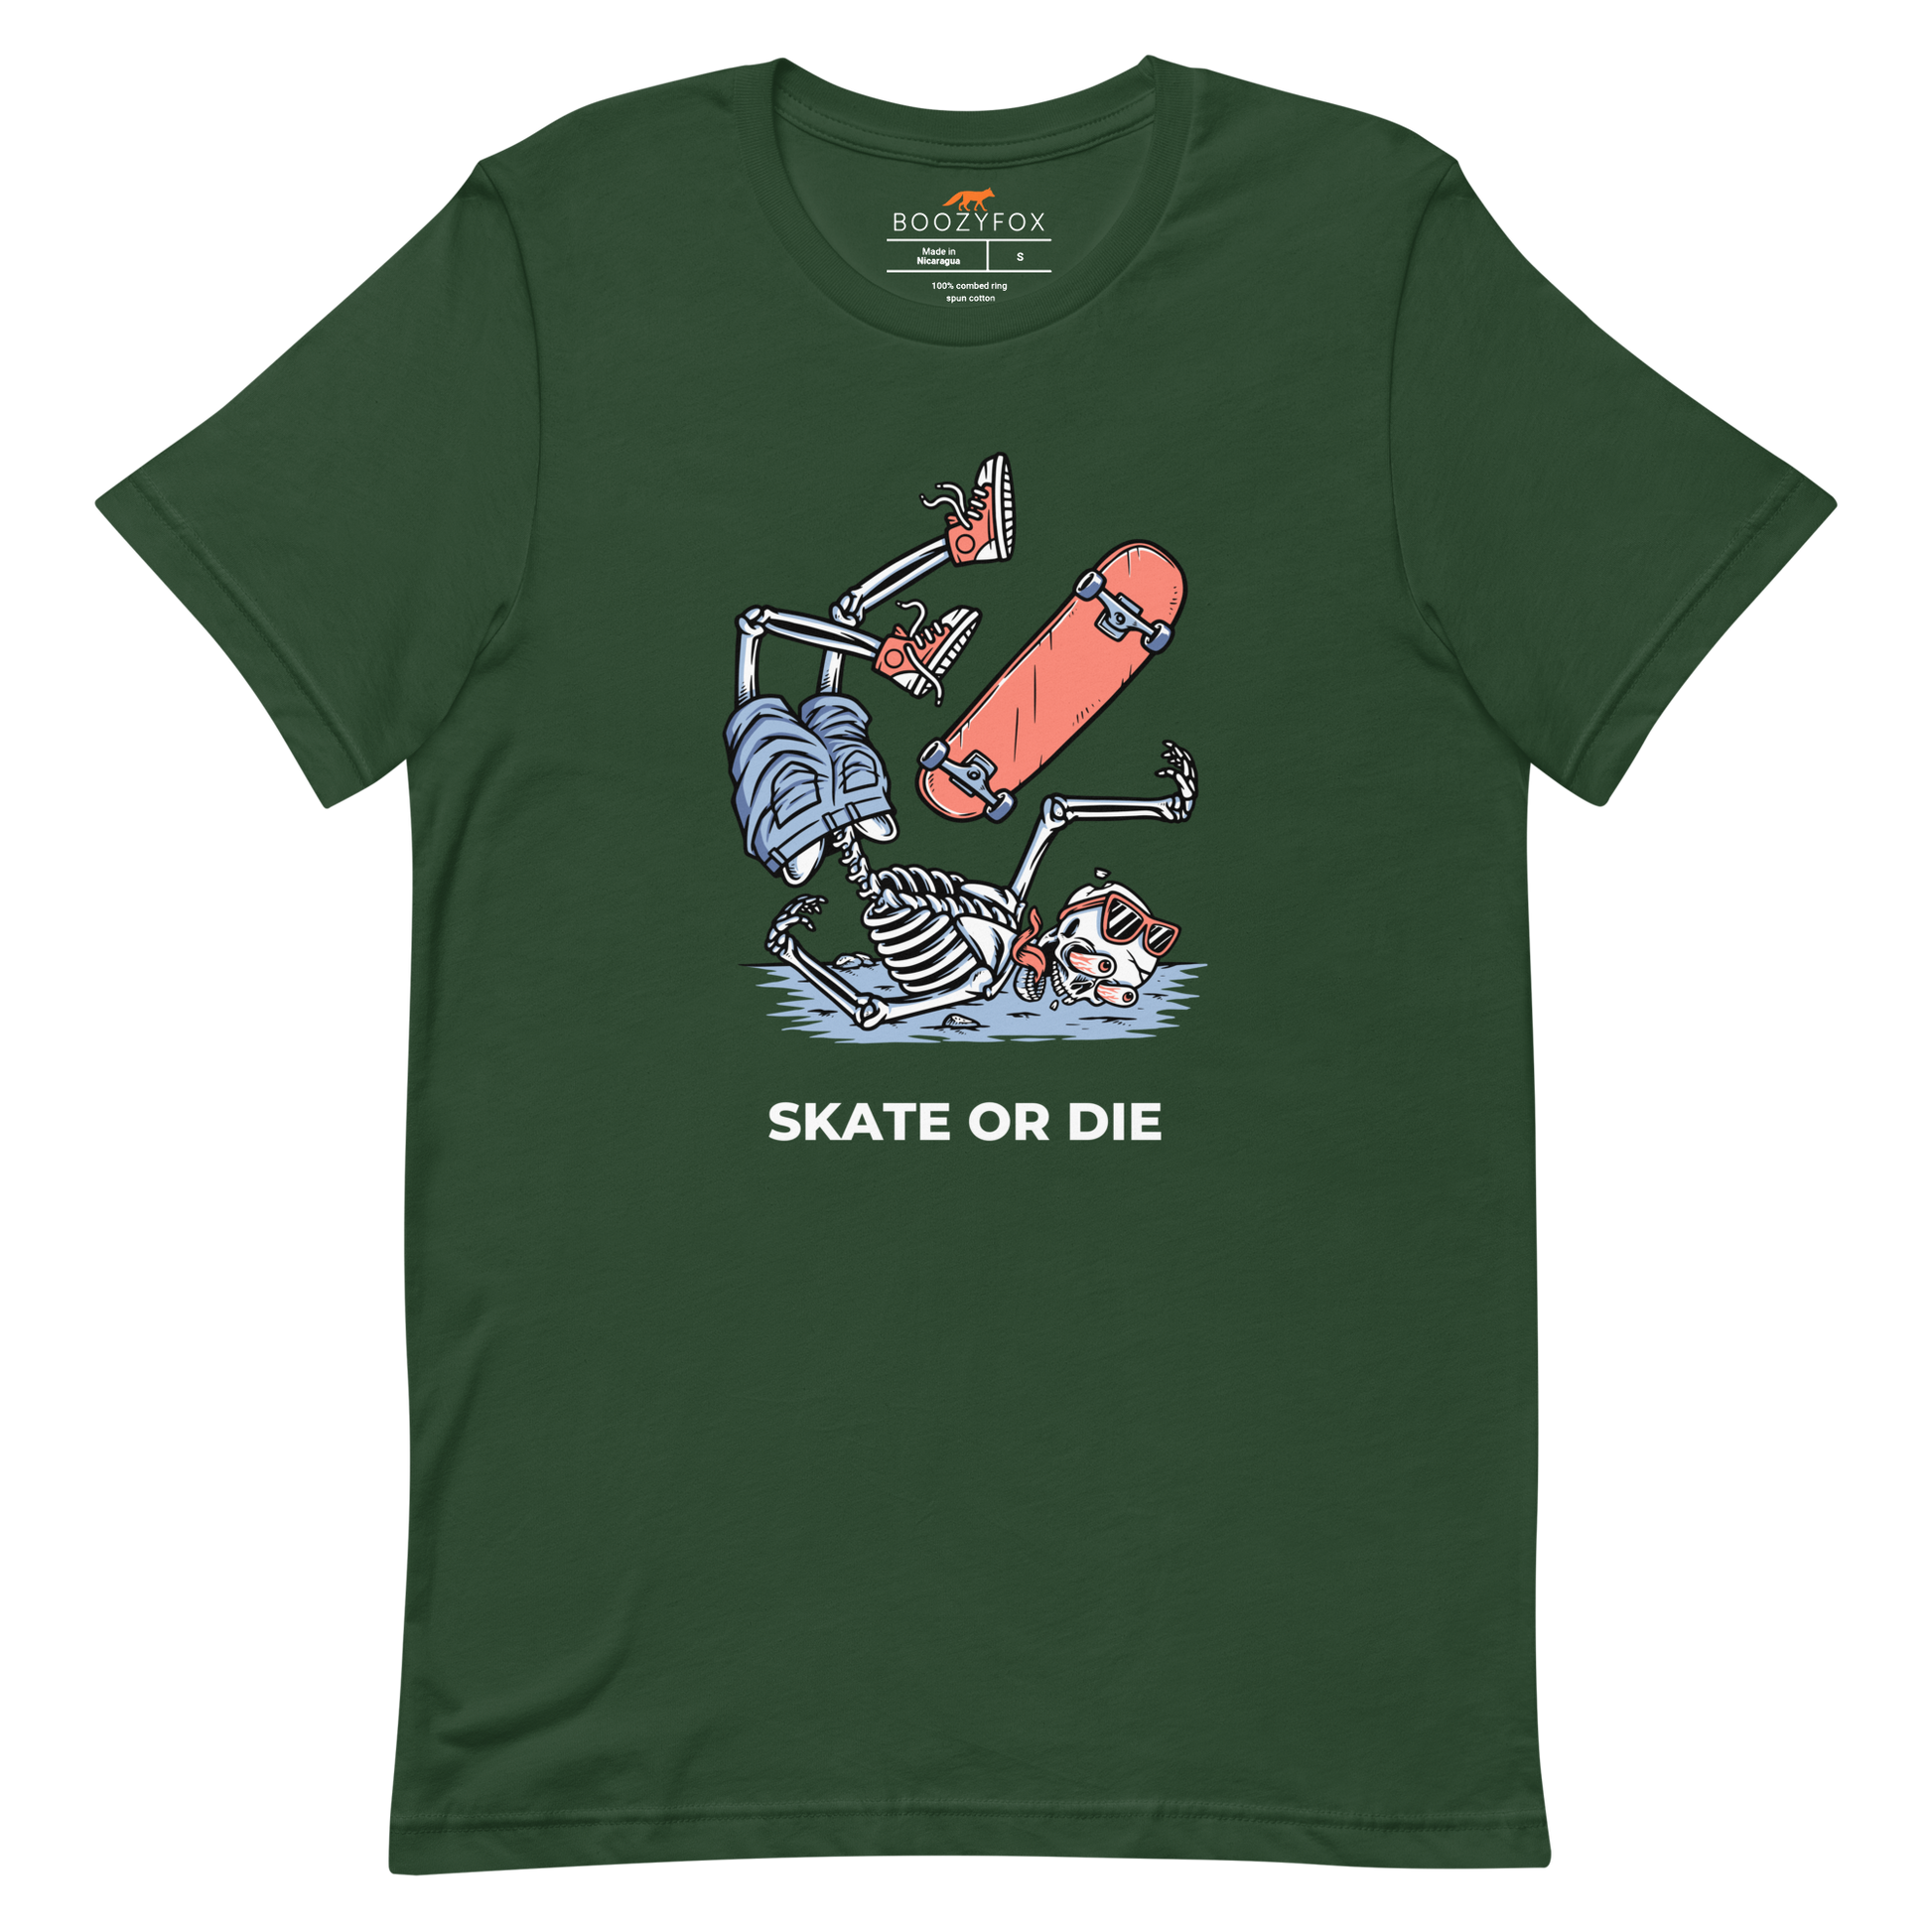 Forest Green Premium Skate or Die Tee featuring a daring Skeleton Falling While Skateboarding graphic on the chest - Funny Graphic Skeleton Tees - Boozy Fox